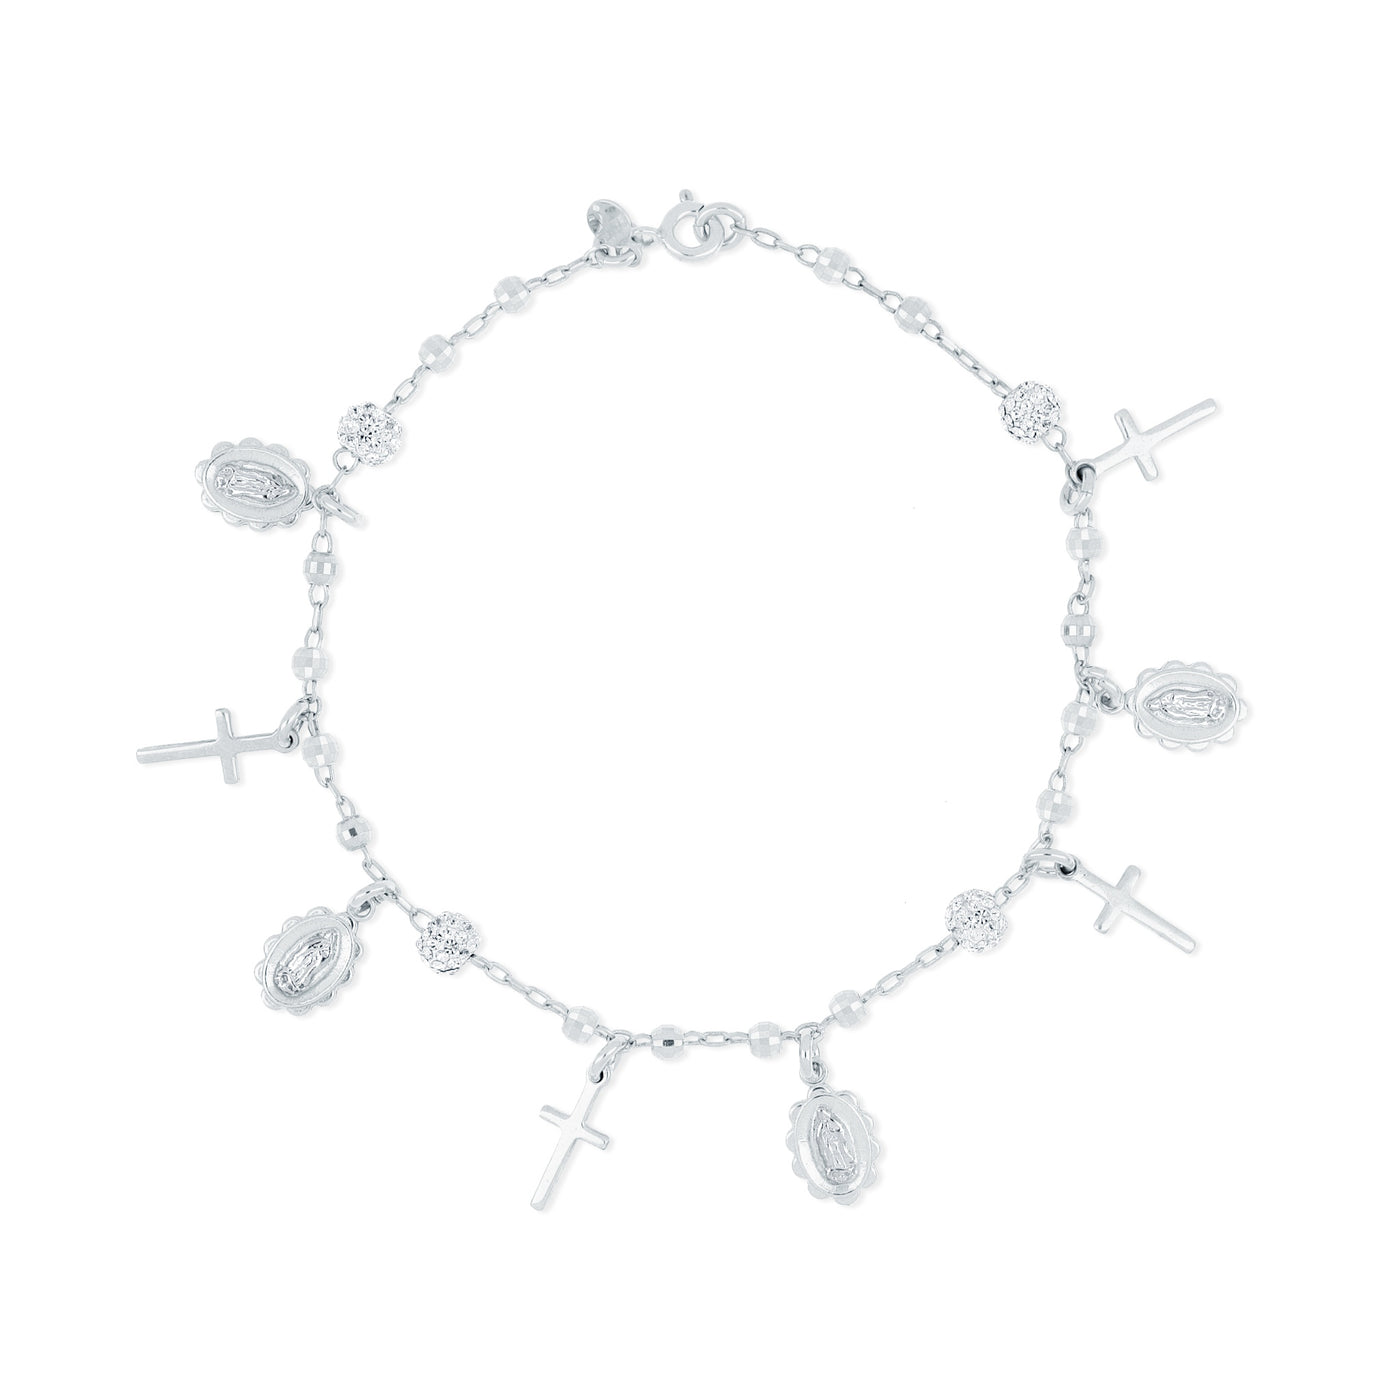 Rebecca Sloane Sterloing Silver Rosary Bracelet with Crystals